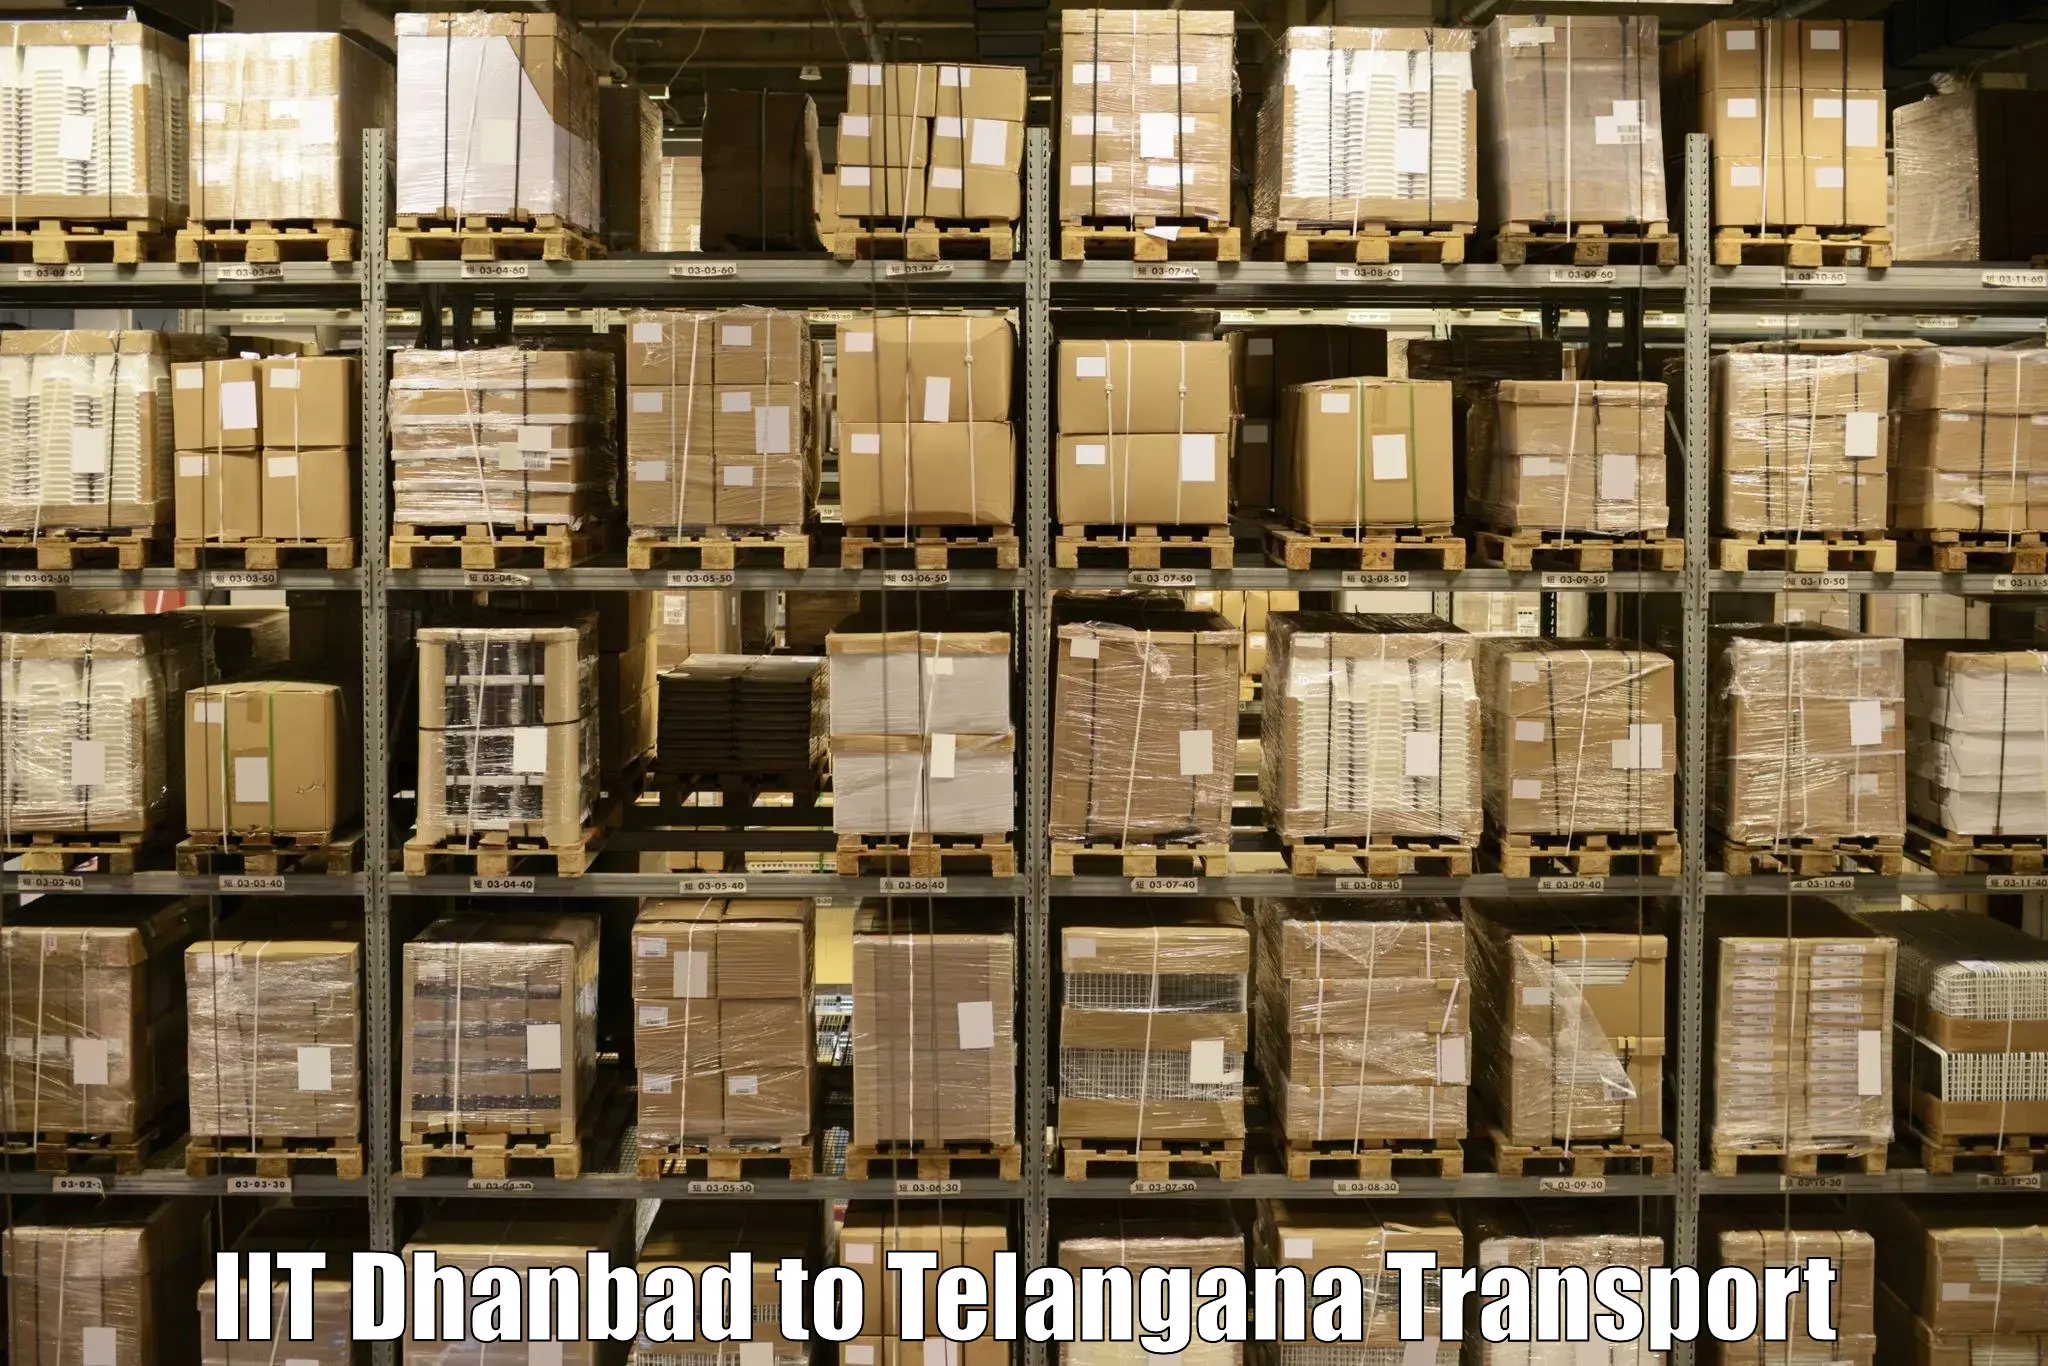 Online transport service IIT Dhanbad to Narayankhed